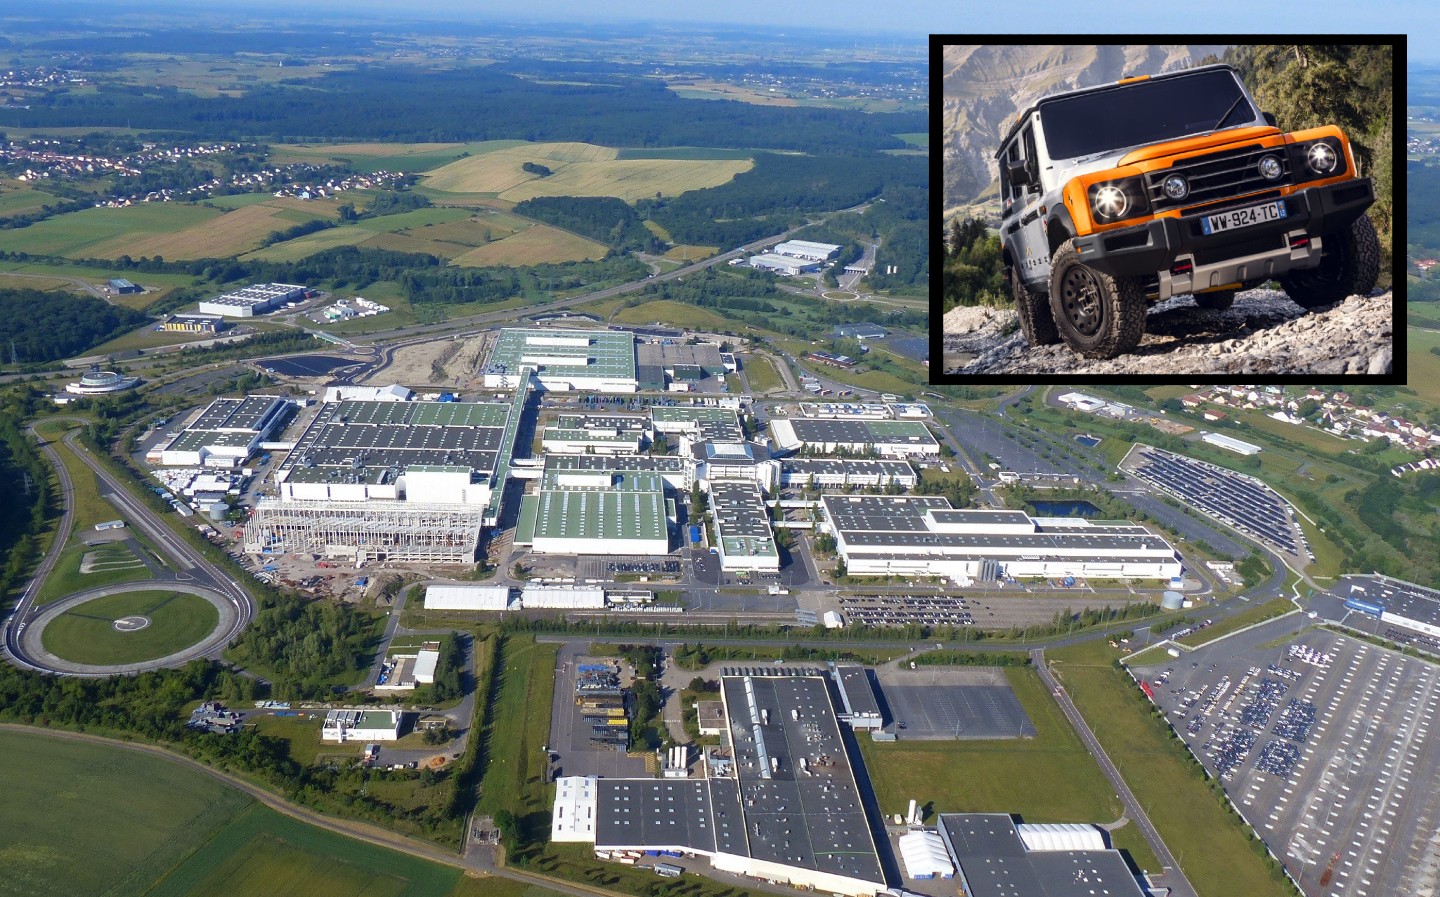 British Ineos Grenadier 4x4 to be built in France